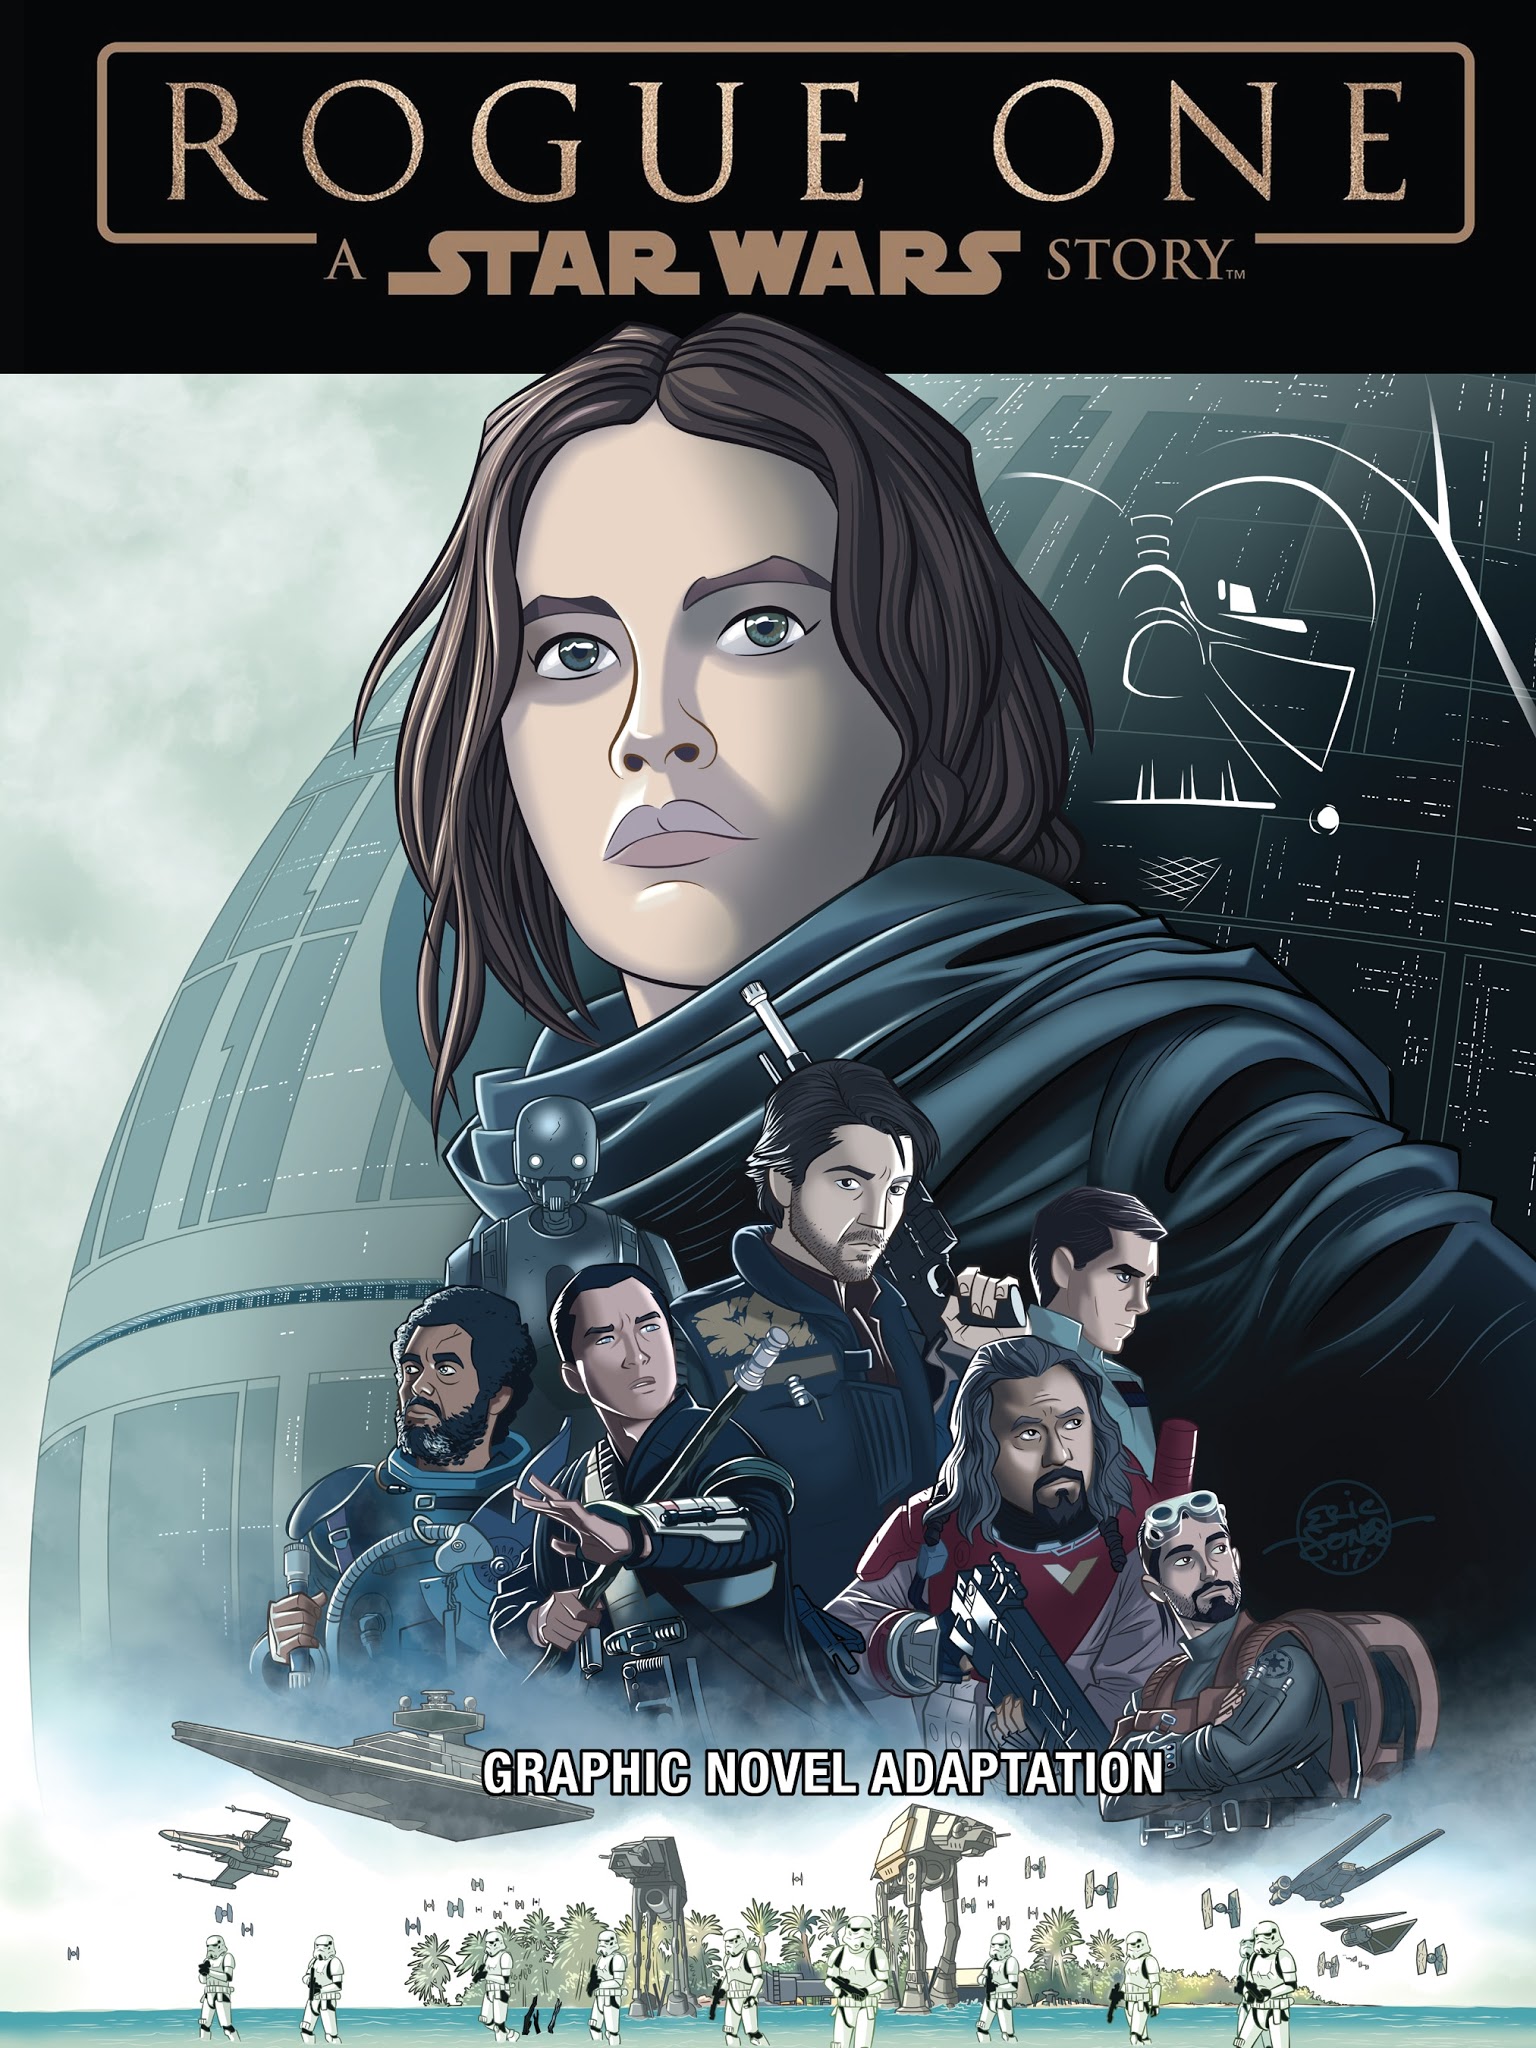 Read online Star Wars: Rogue One Graphic Novel Adaptation comic -  Issue # TPB - 1